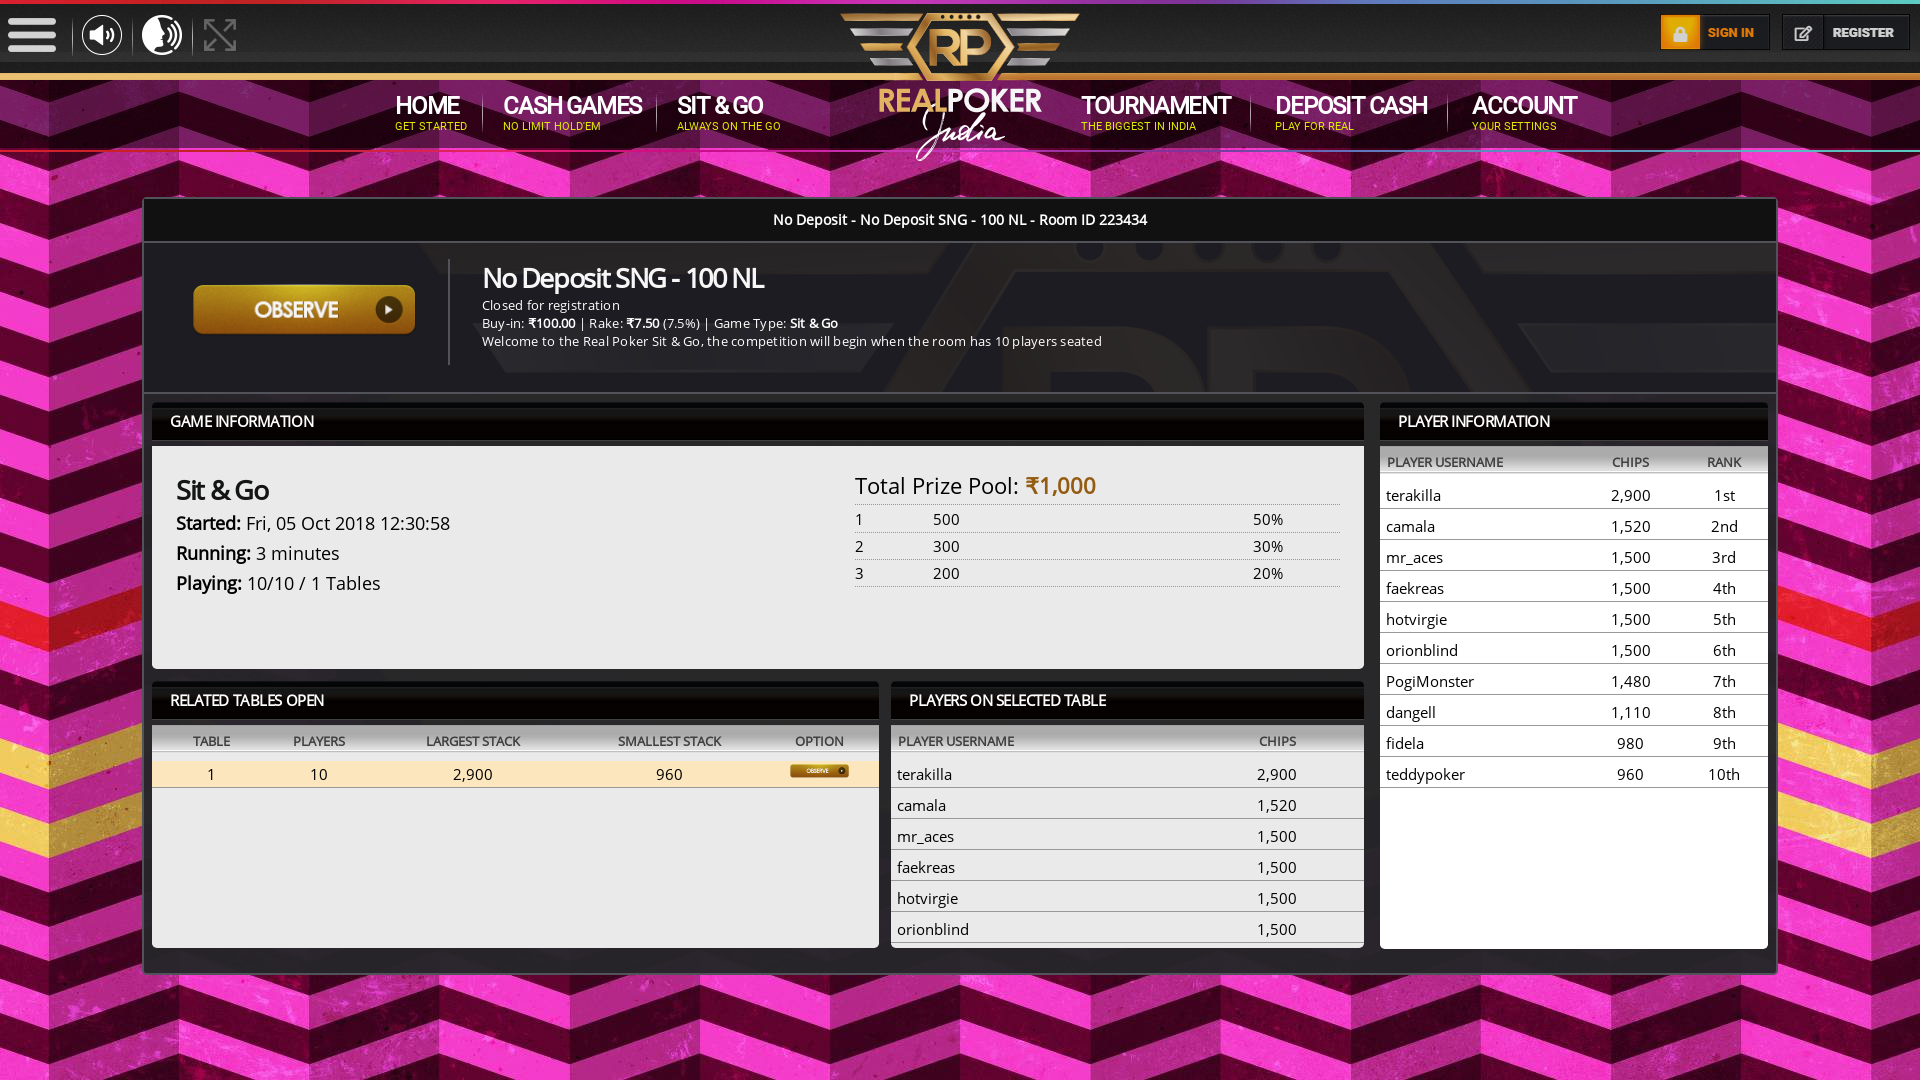 Indian online poker on a 10 player table in the 2nd minute match up